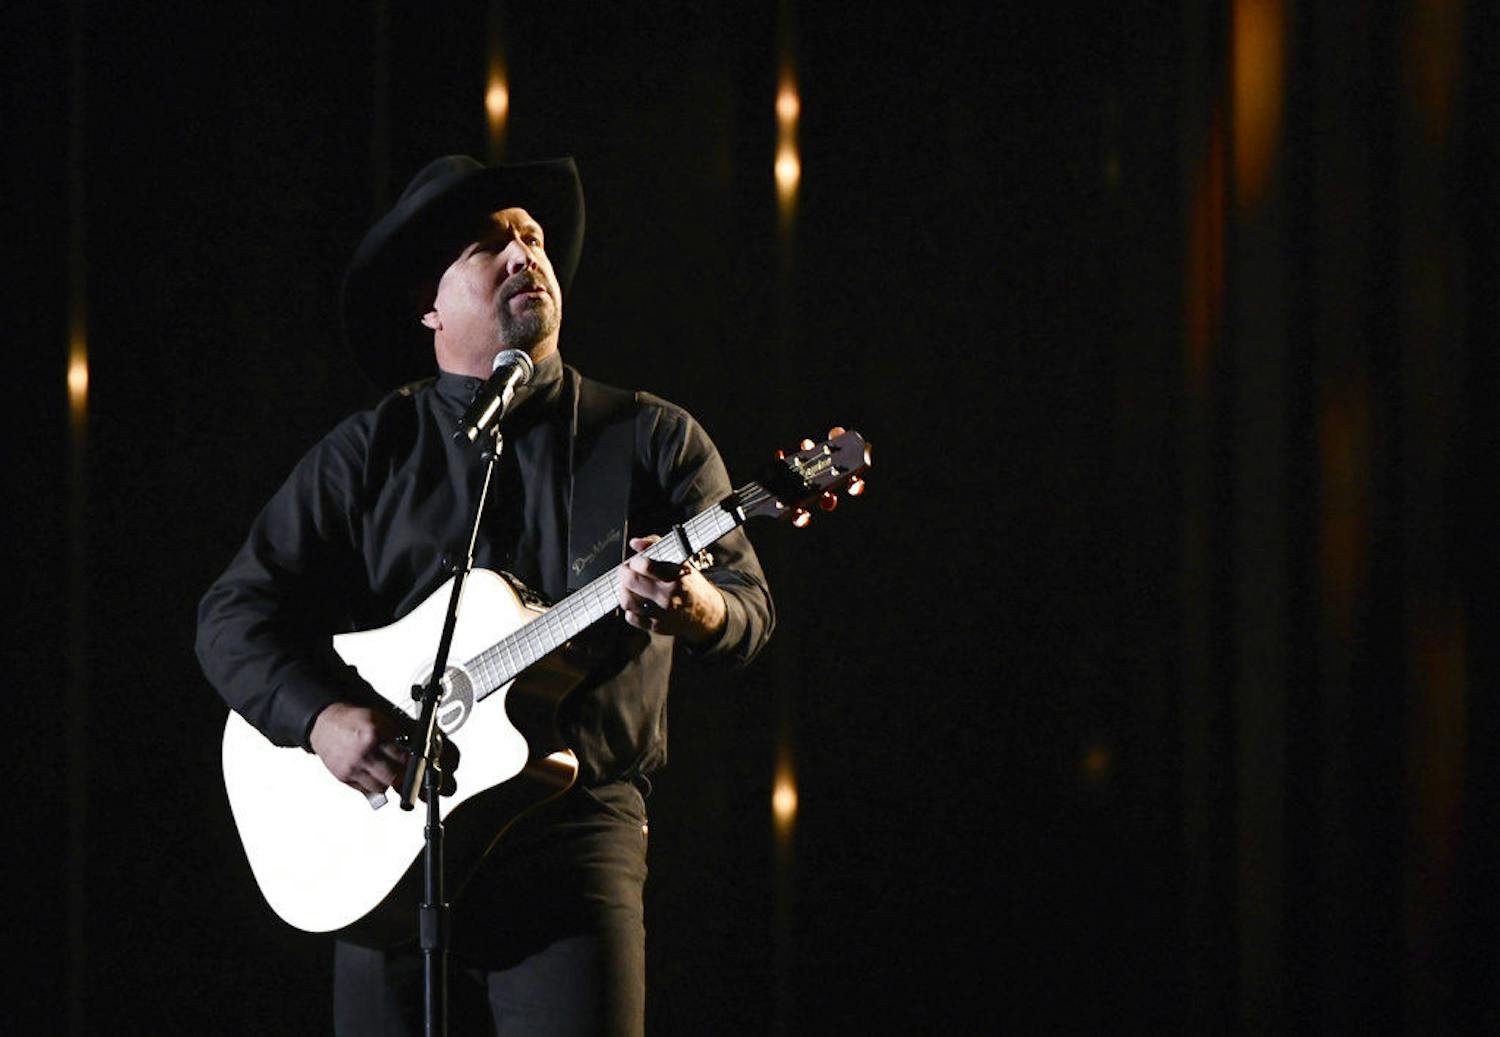 Garth Brooks performs "Stronger Than Me" at the 52nd annual CMA Awards at Bridgestone Arena on Wednesday, Nov. 14, 2018, in Nashville, Tenn. (Photo by Charles Sykes/Invision/AP)